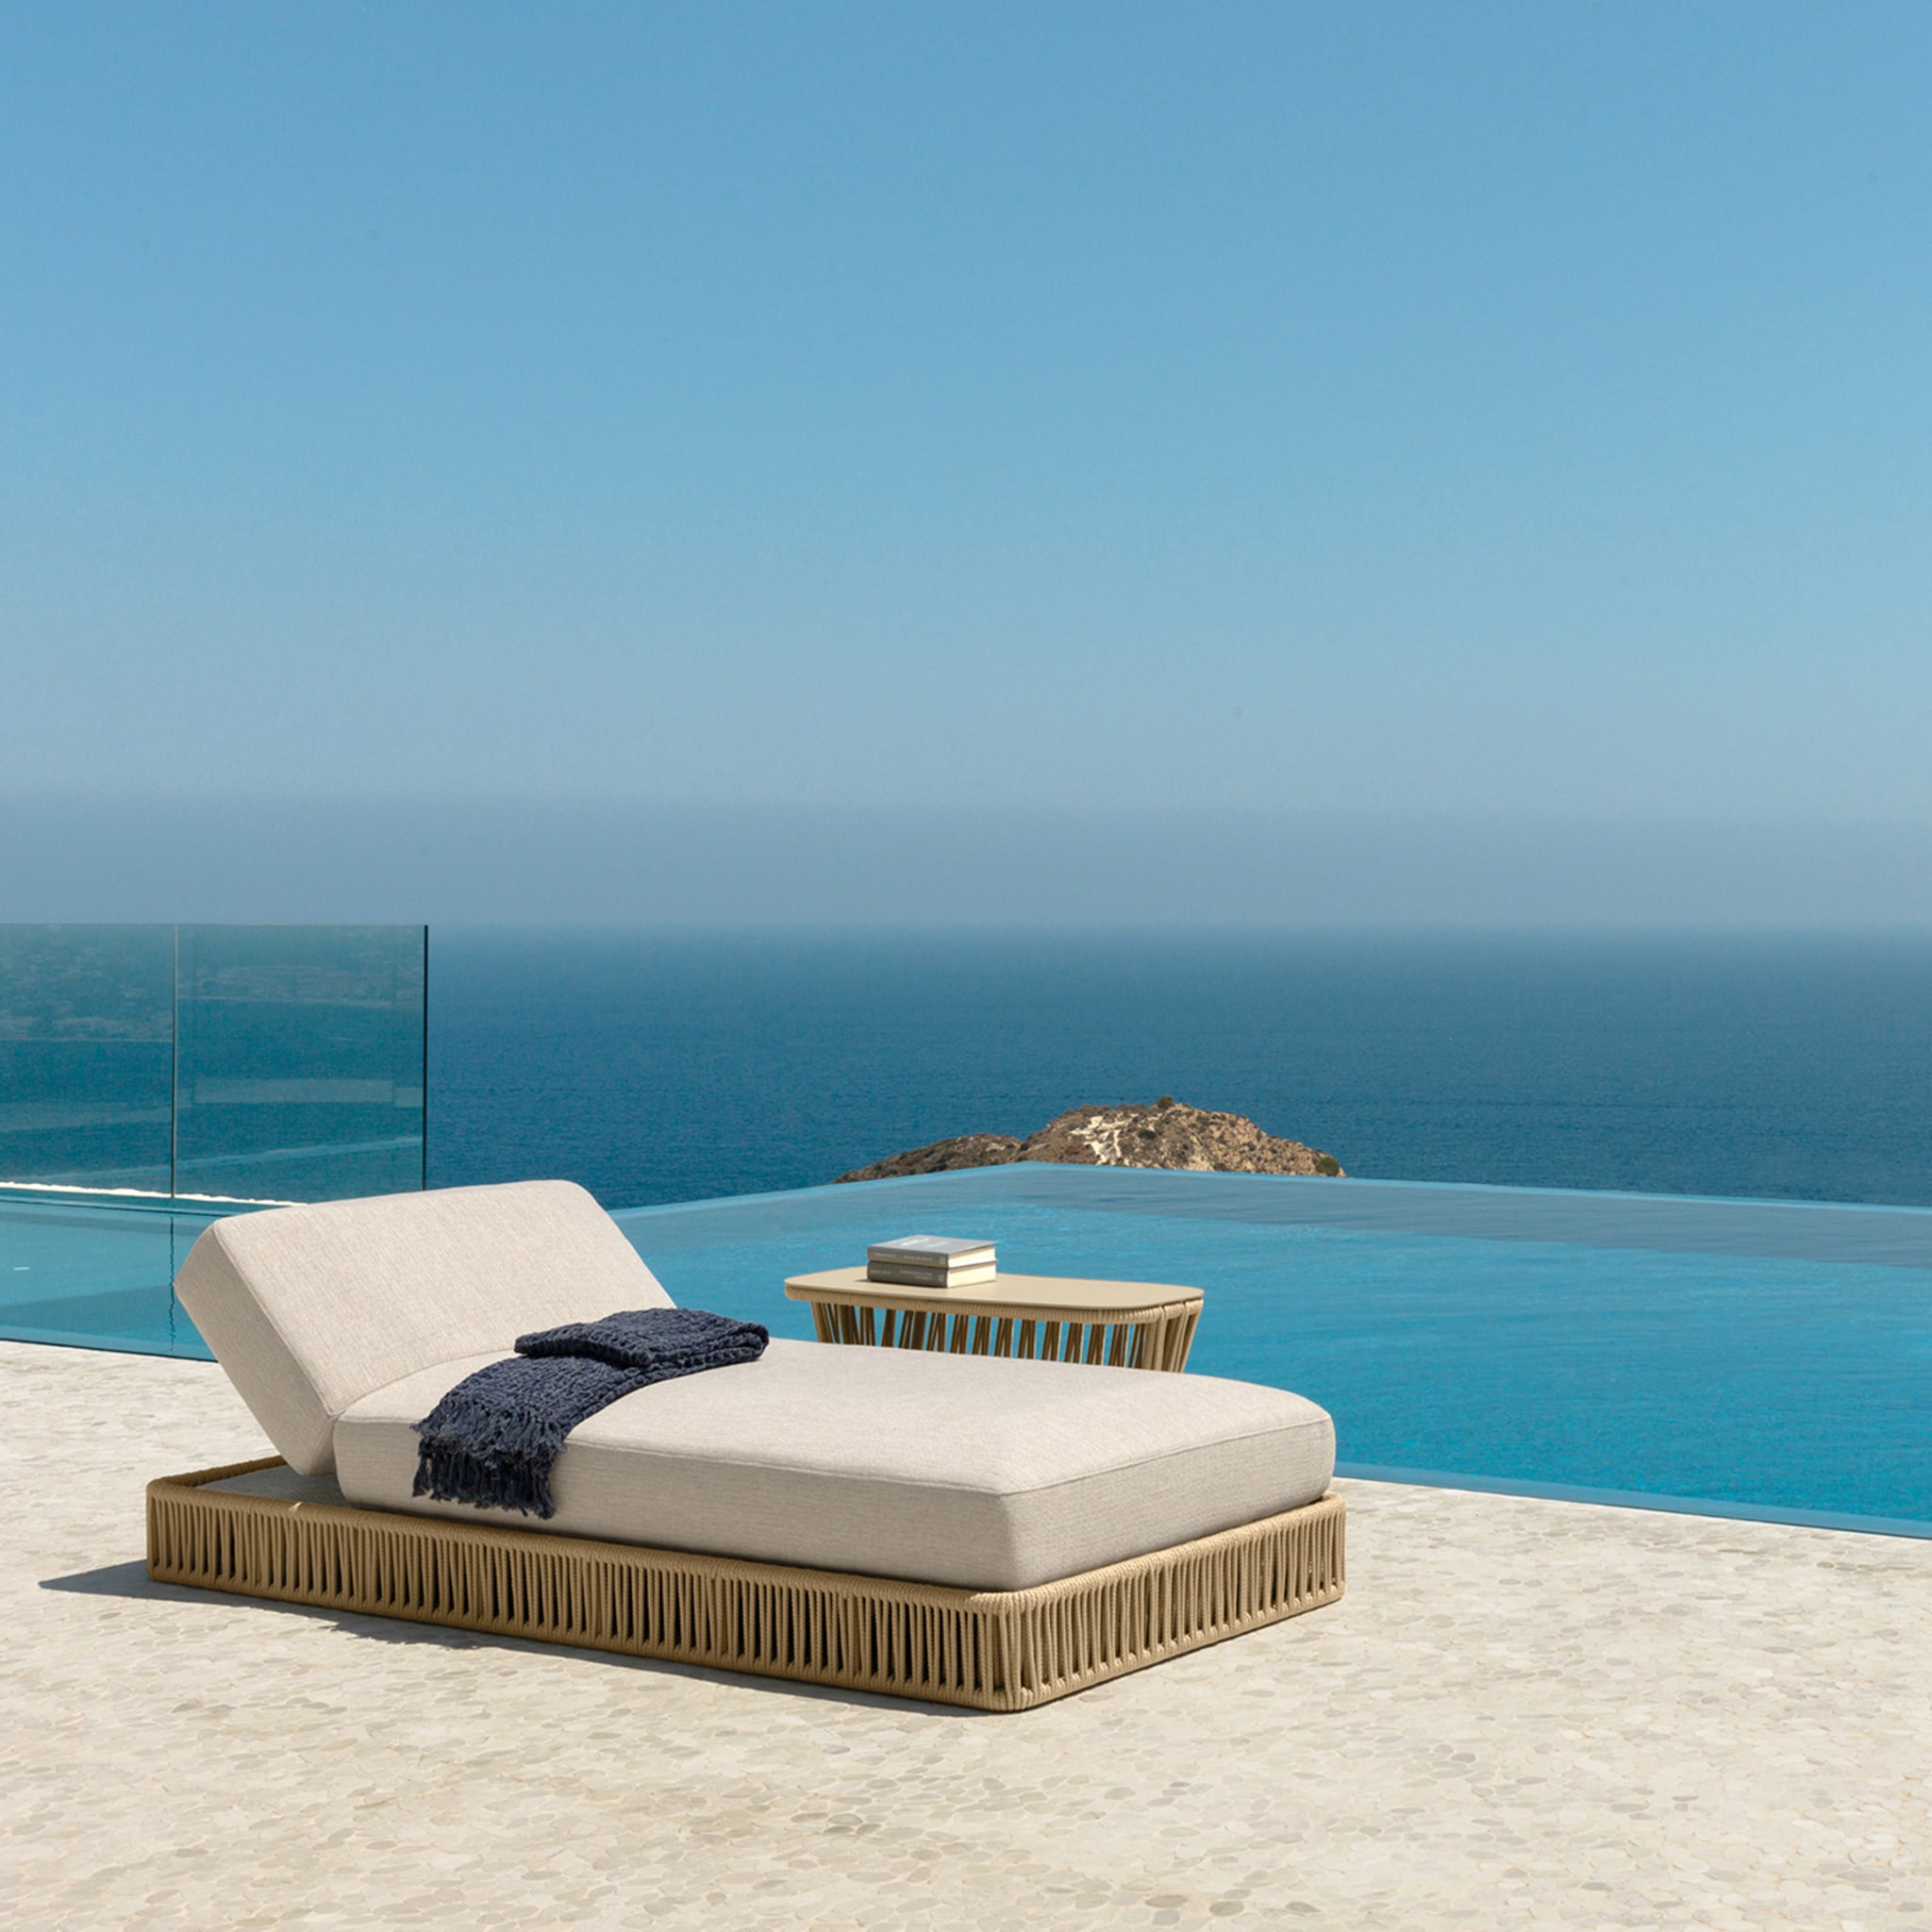 Cliff Beige Sunbed by Ludovica & Roberto Palomba - Alternative view 2